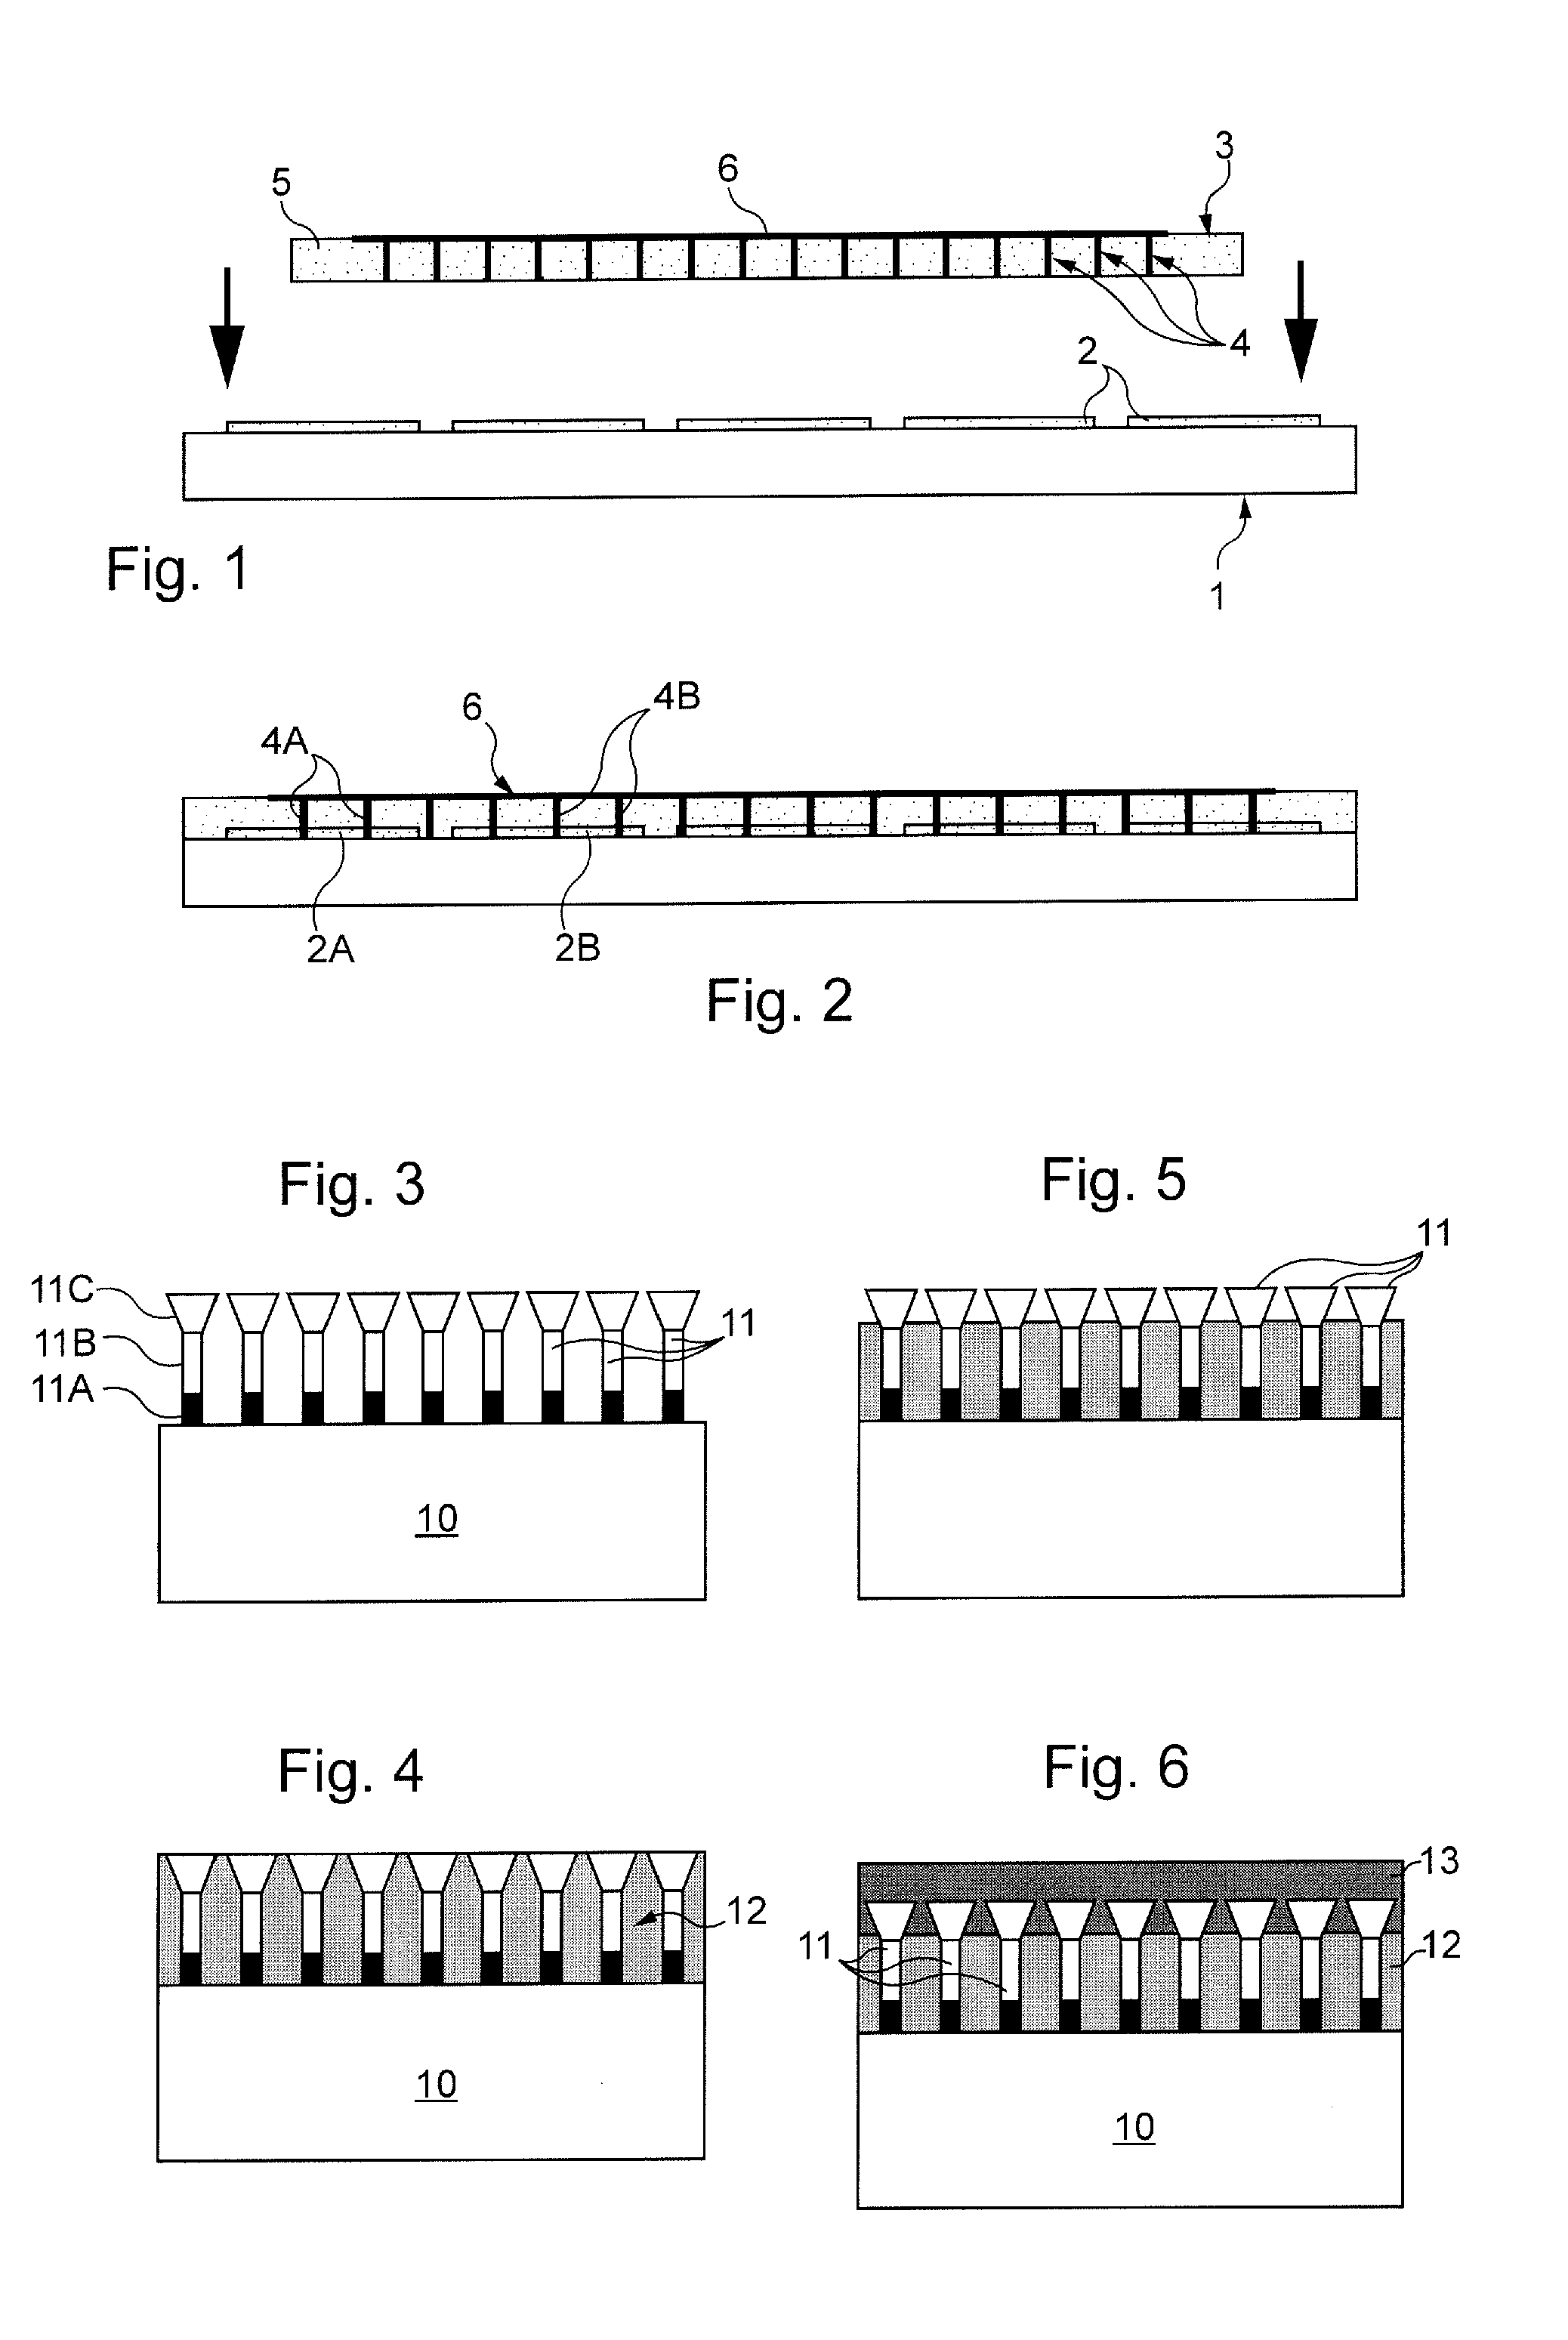 Method for manufacturing a very-high-resolution screen using a nanowire-based emitting anisotropic conductive film